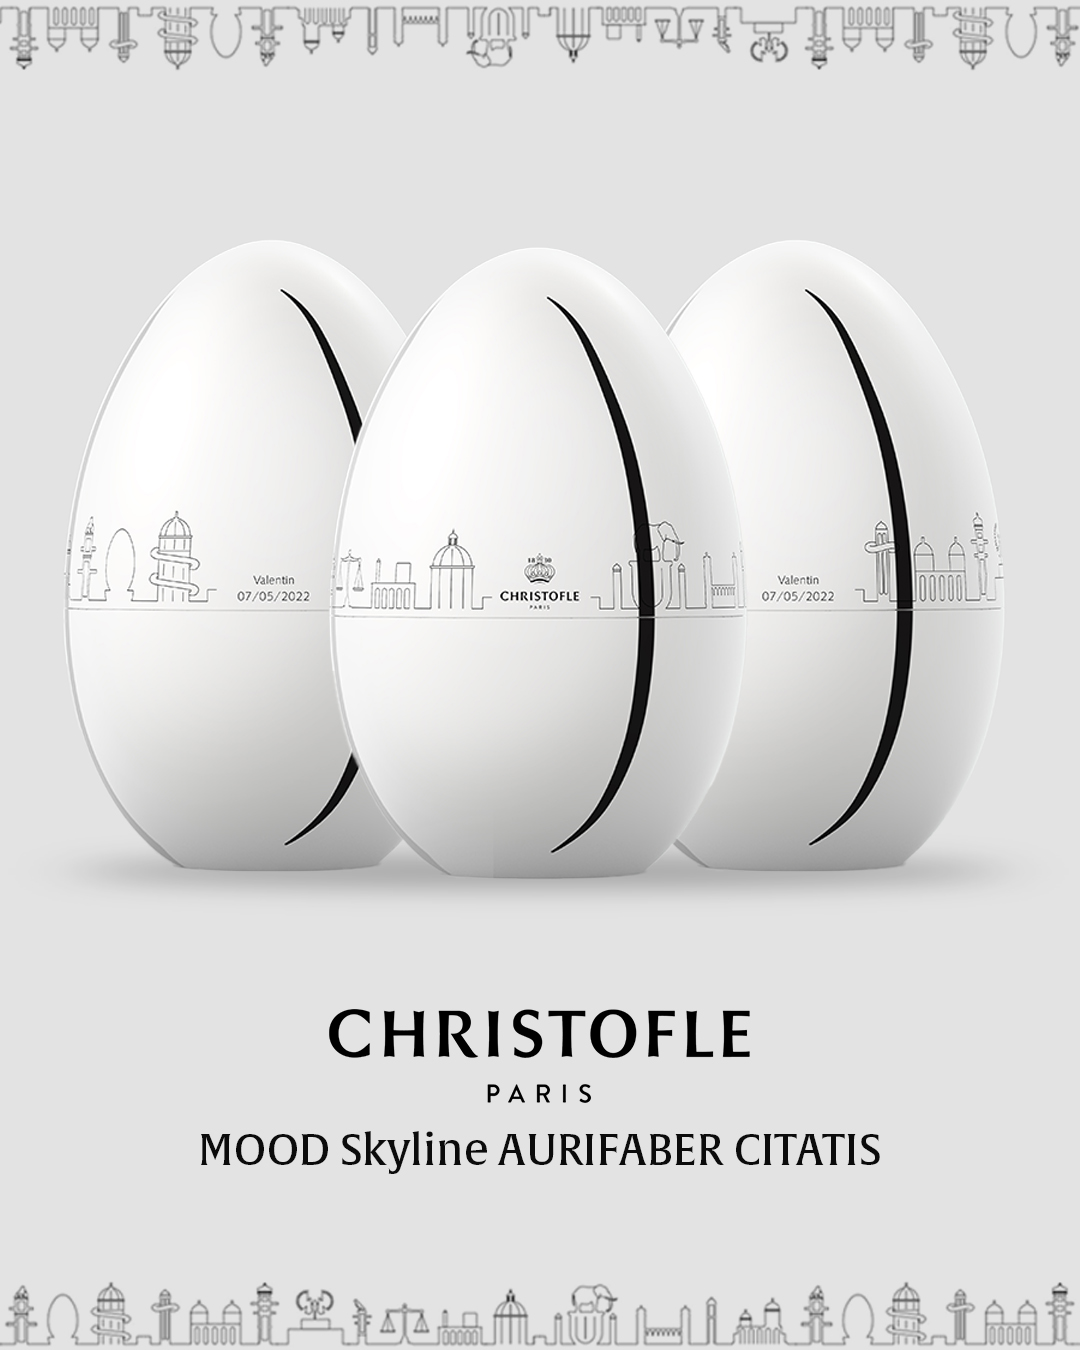 Image for Christofle Releases A Limited-Edition Mood Skyline Aurifaber Citatis Available Exclusively To 925 Genesis Mood NFT Owners